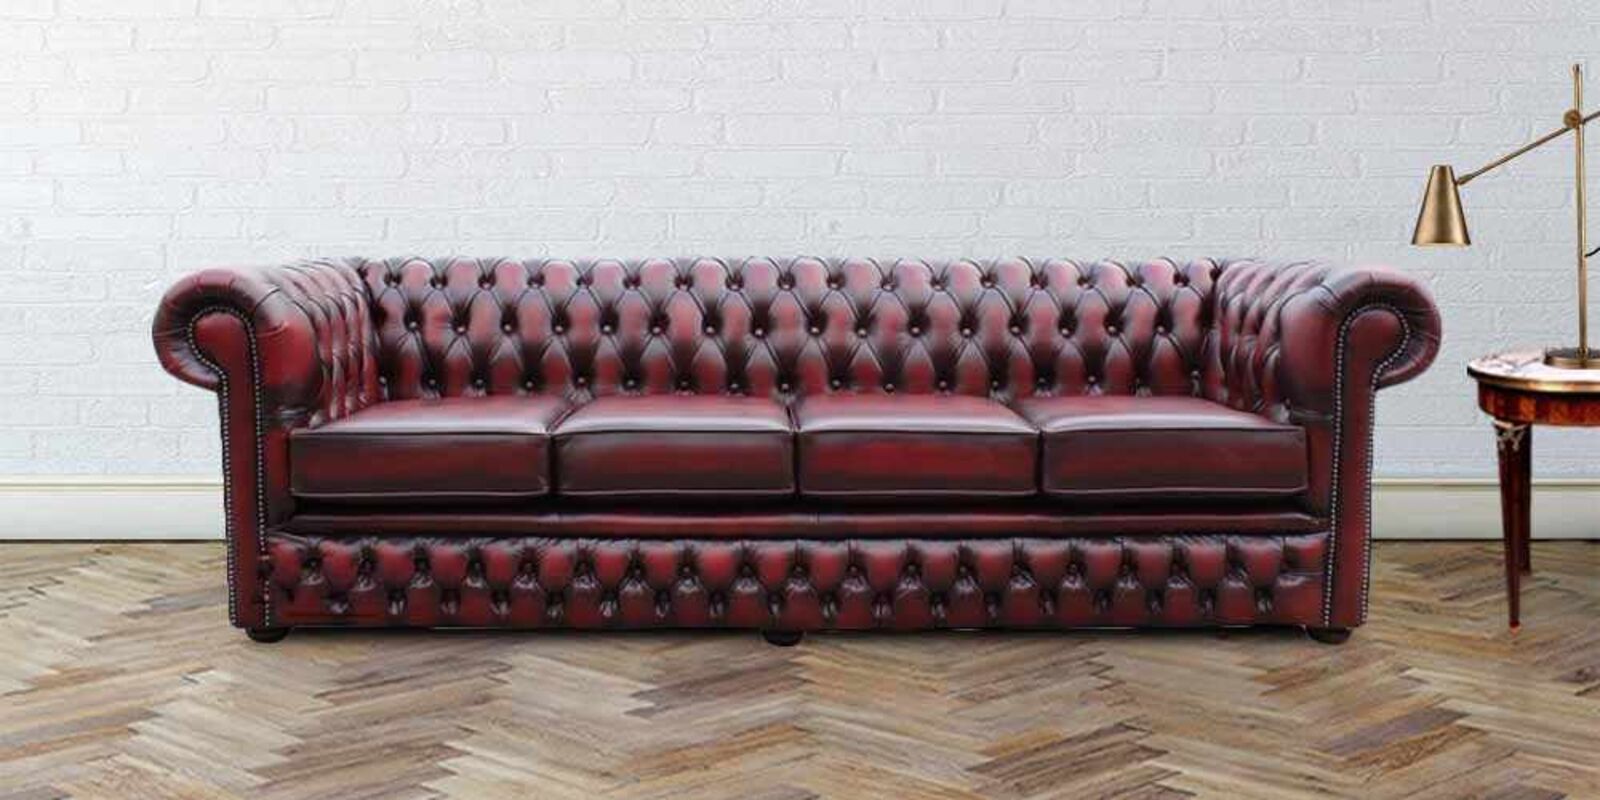 Product photograph of Rub Off Antique Oxblood Leather Chesterfield Durham 4 Seater Settee Sofa Offer Designersofas4u from Designer Sofas 4U